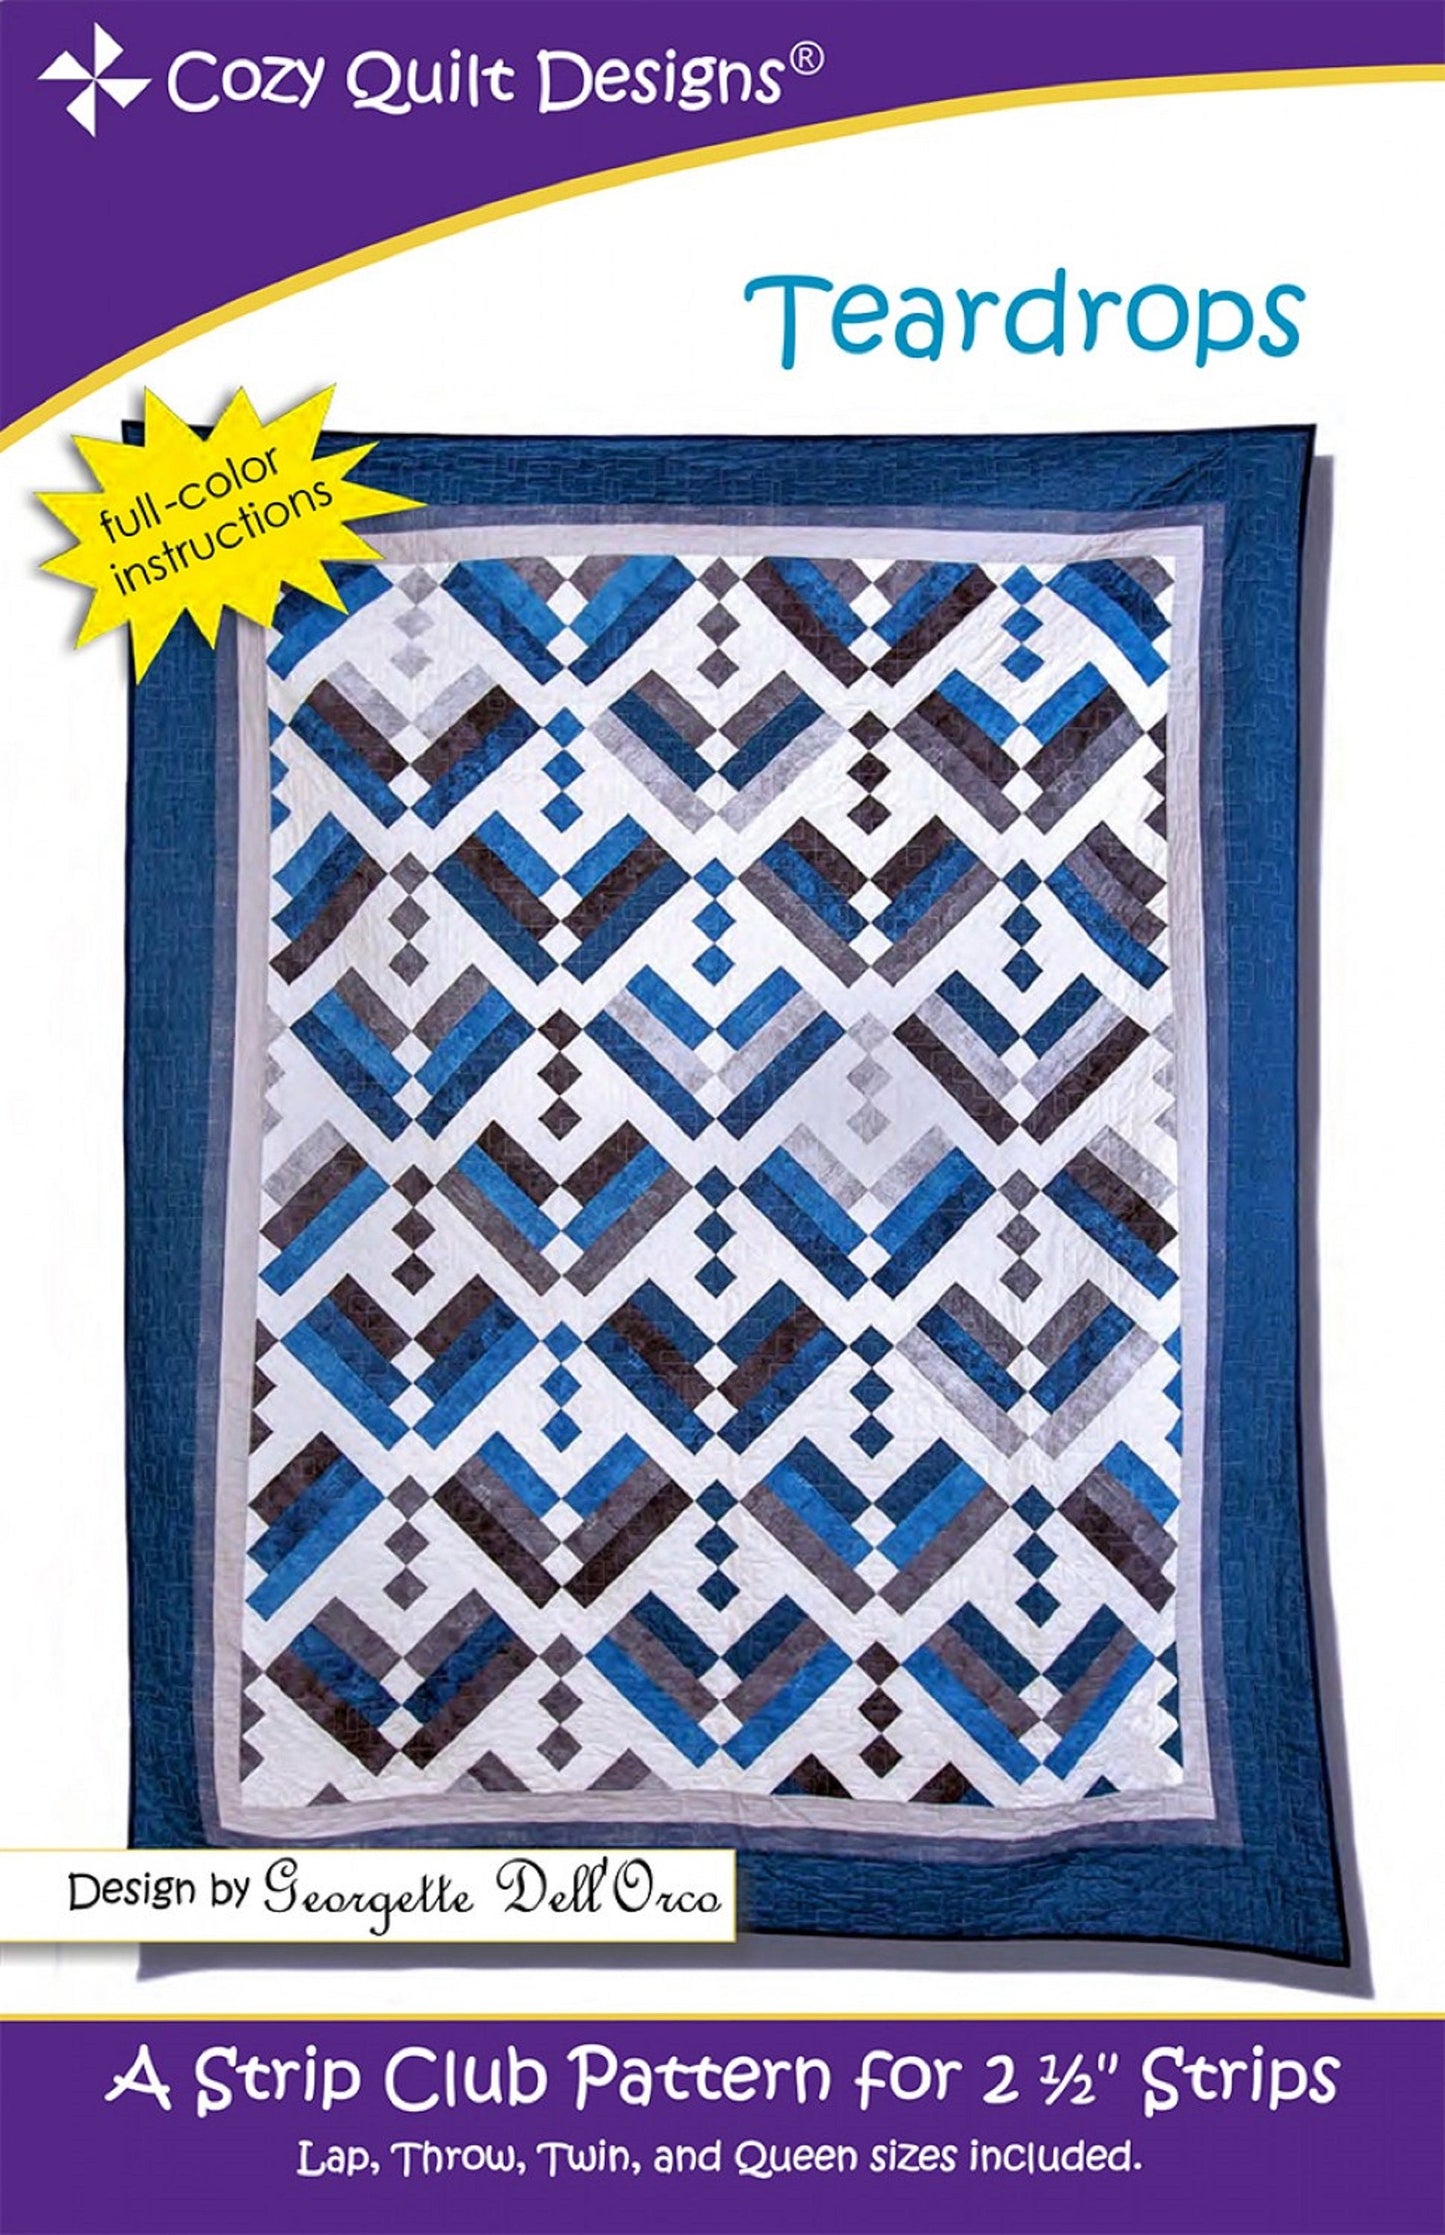 Teardrops Quilt Pattern by Cozy Quilt Designs